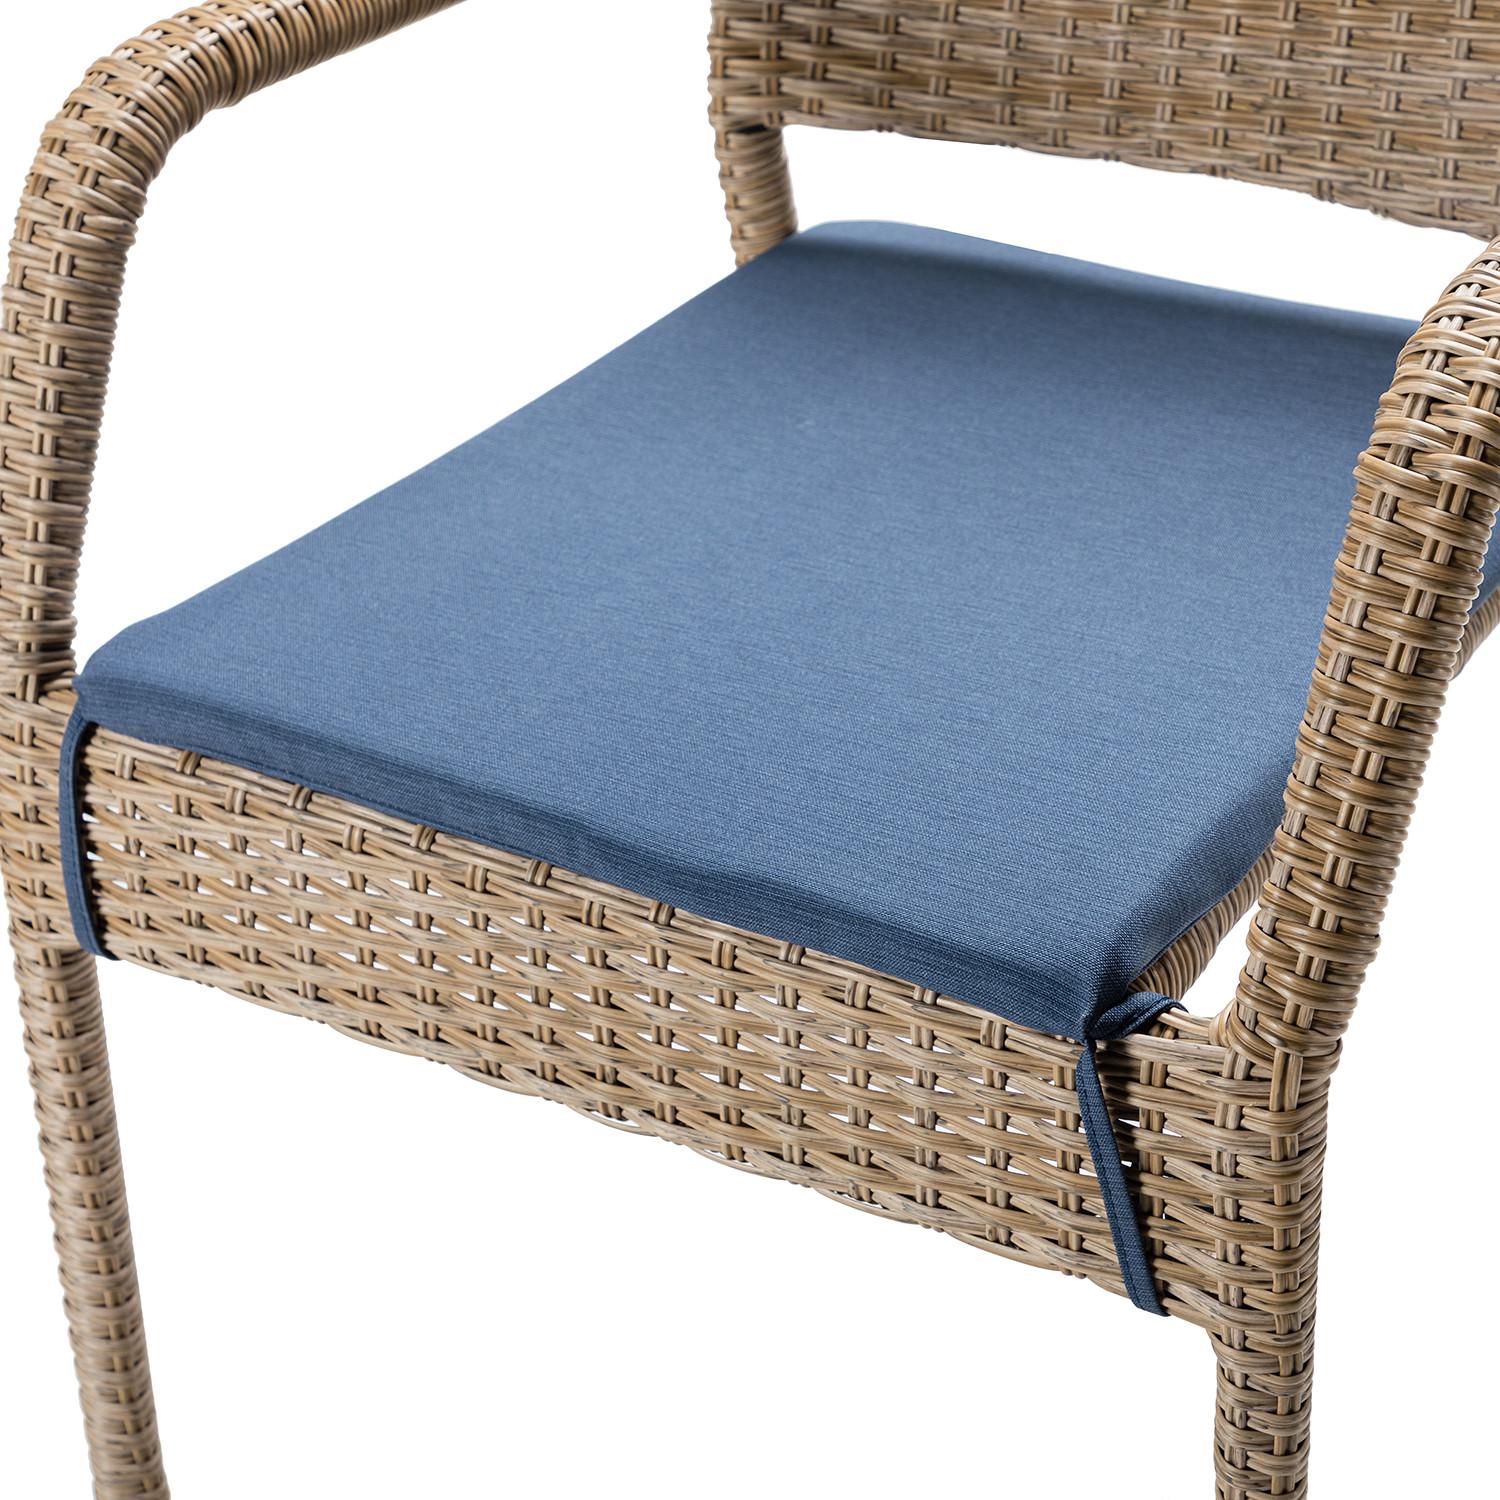 Natural Faux Rattan and Navy Outdoor Dining Table Set